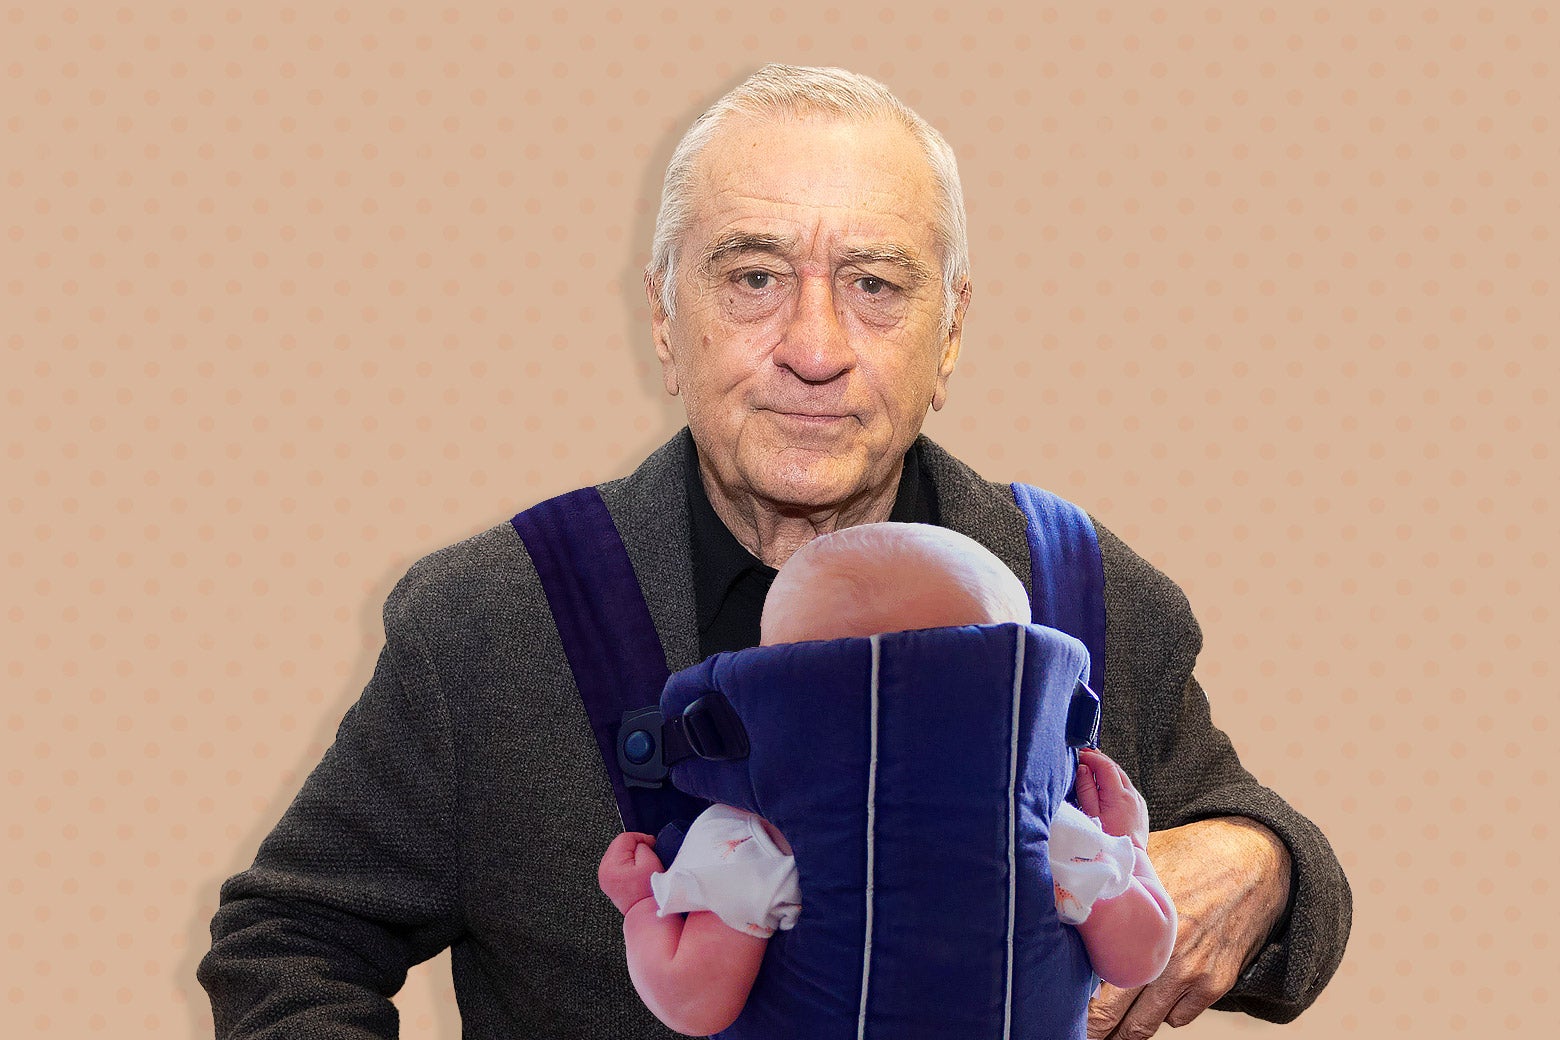 Robert De Niro is a dad, again, at 79. Here he is holding a baby, something he's very used to doing by now.